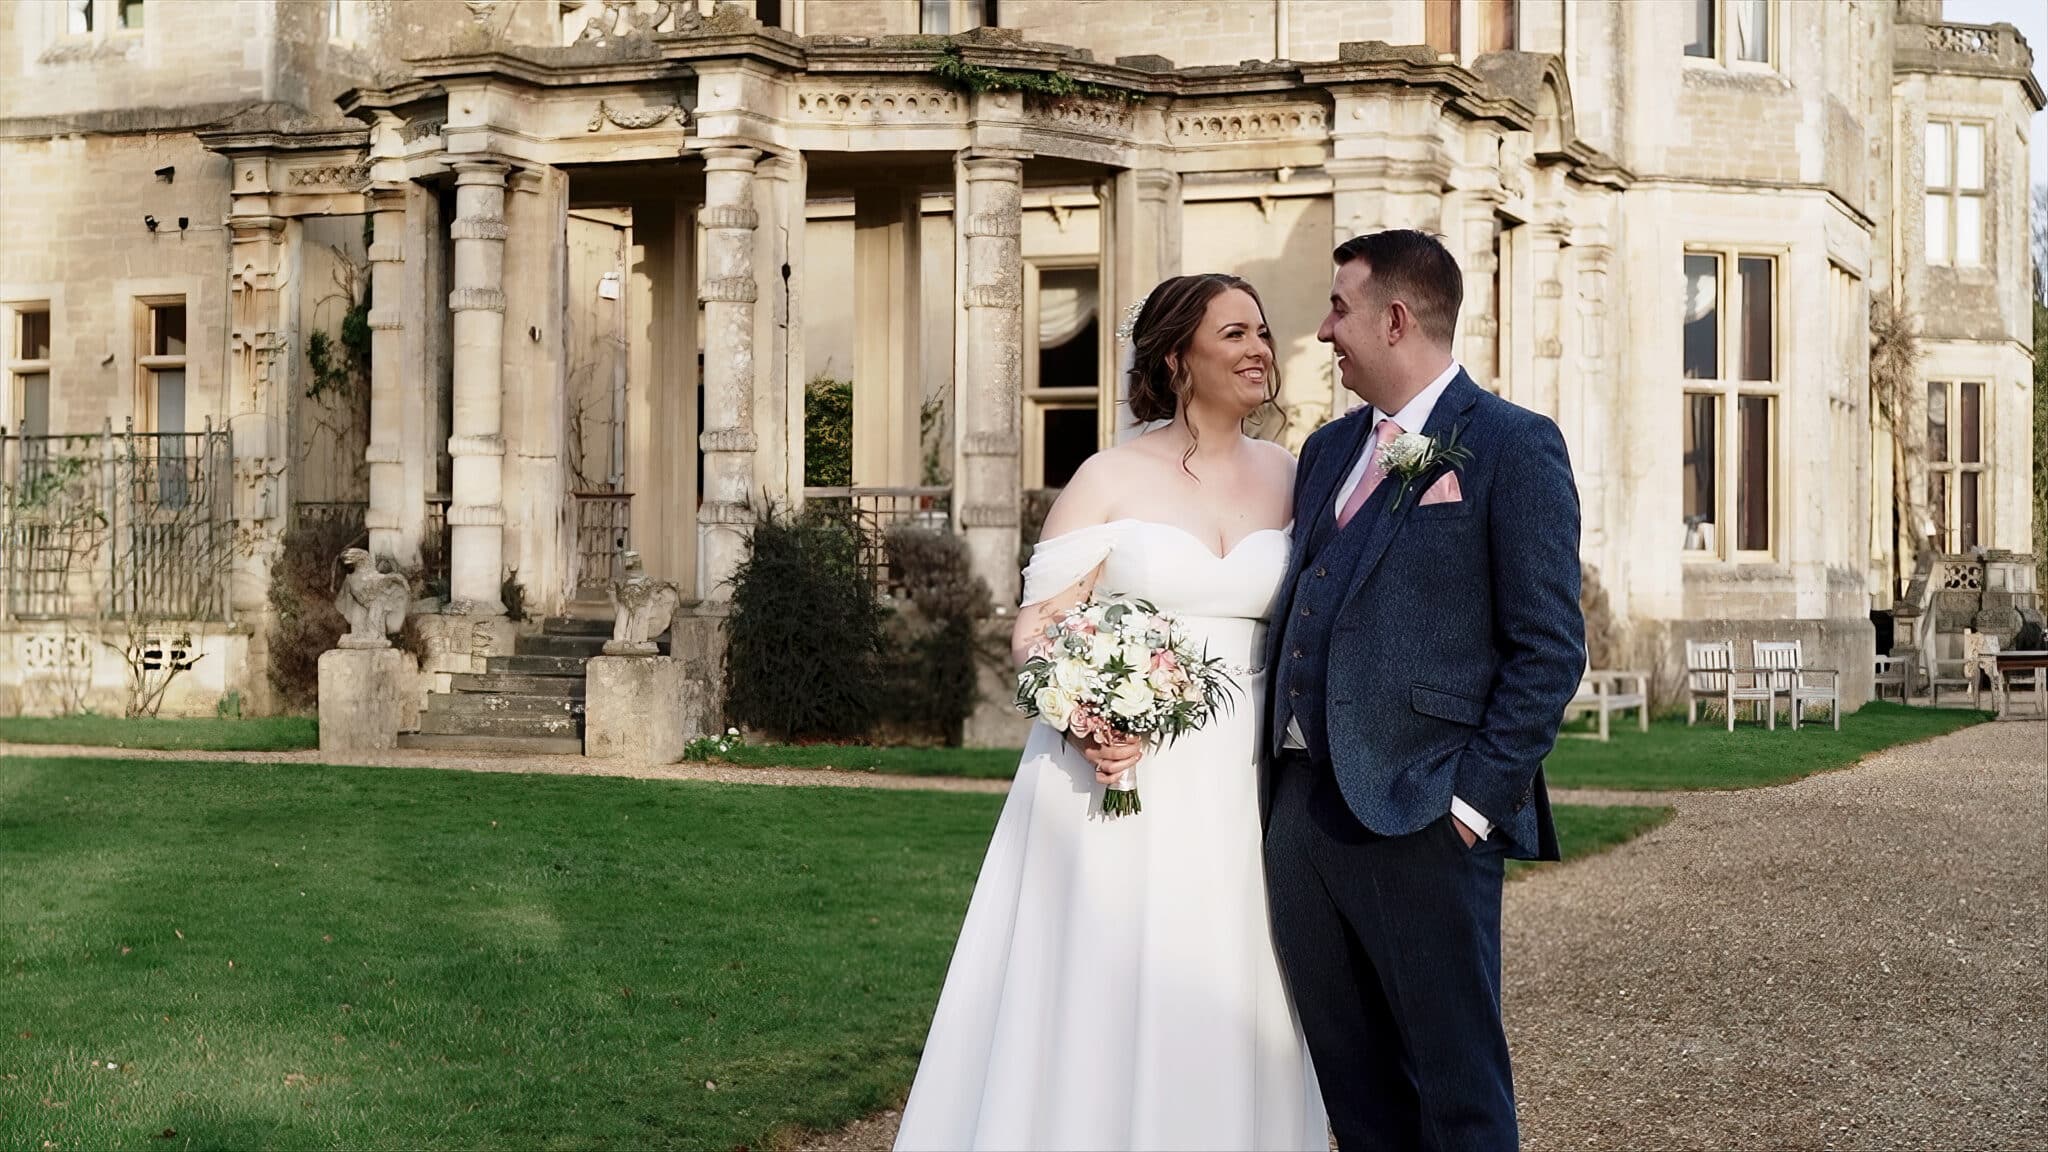 Orchardleigh wedding videographer still Frame image of a couple outside the wedding venue